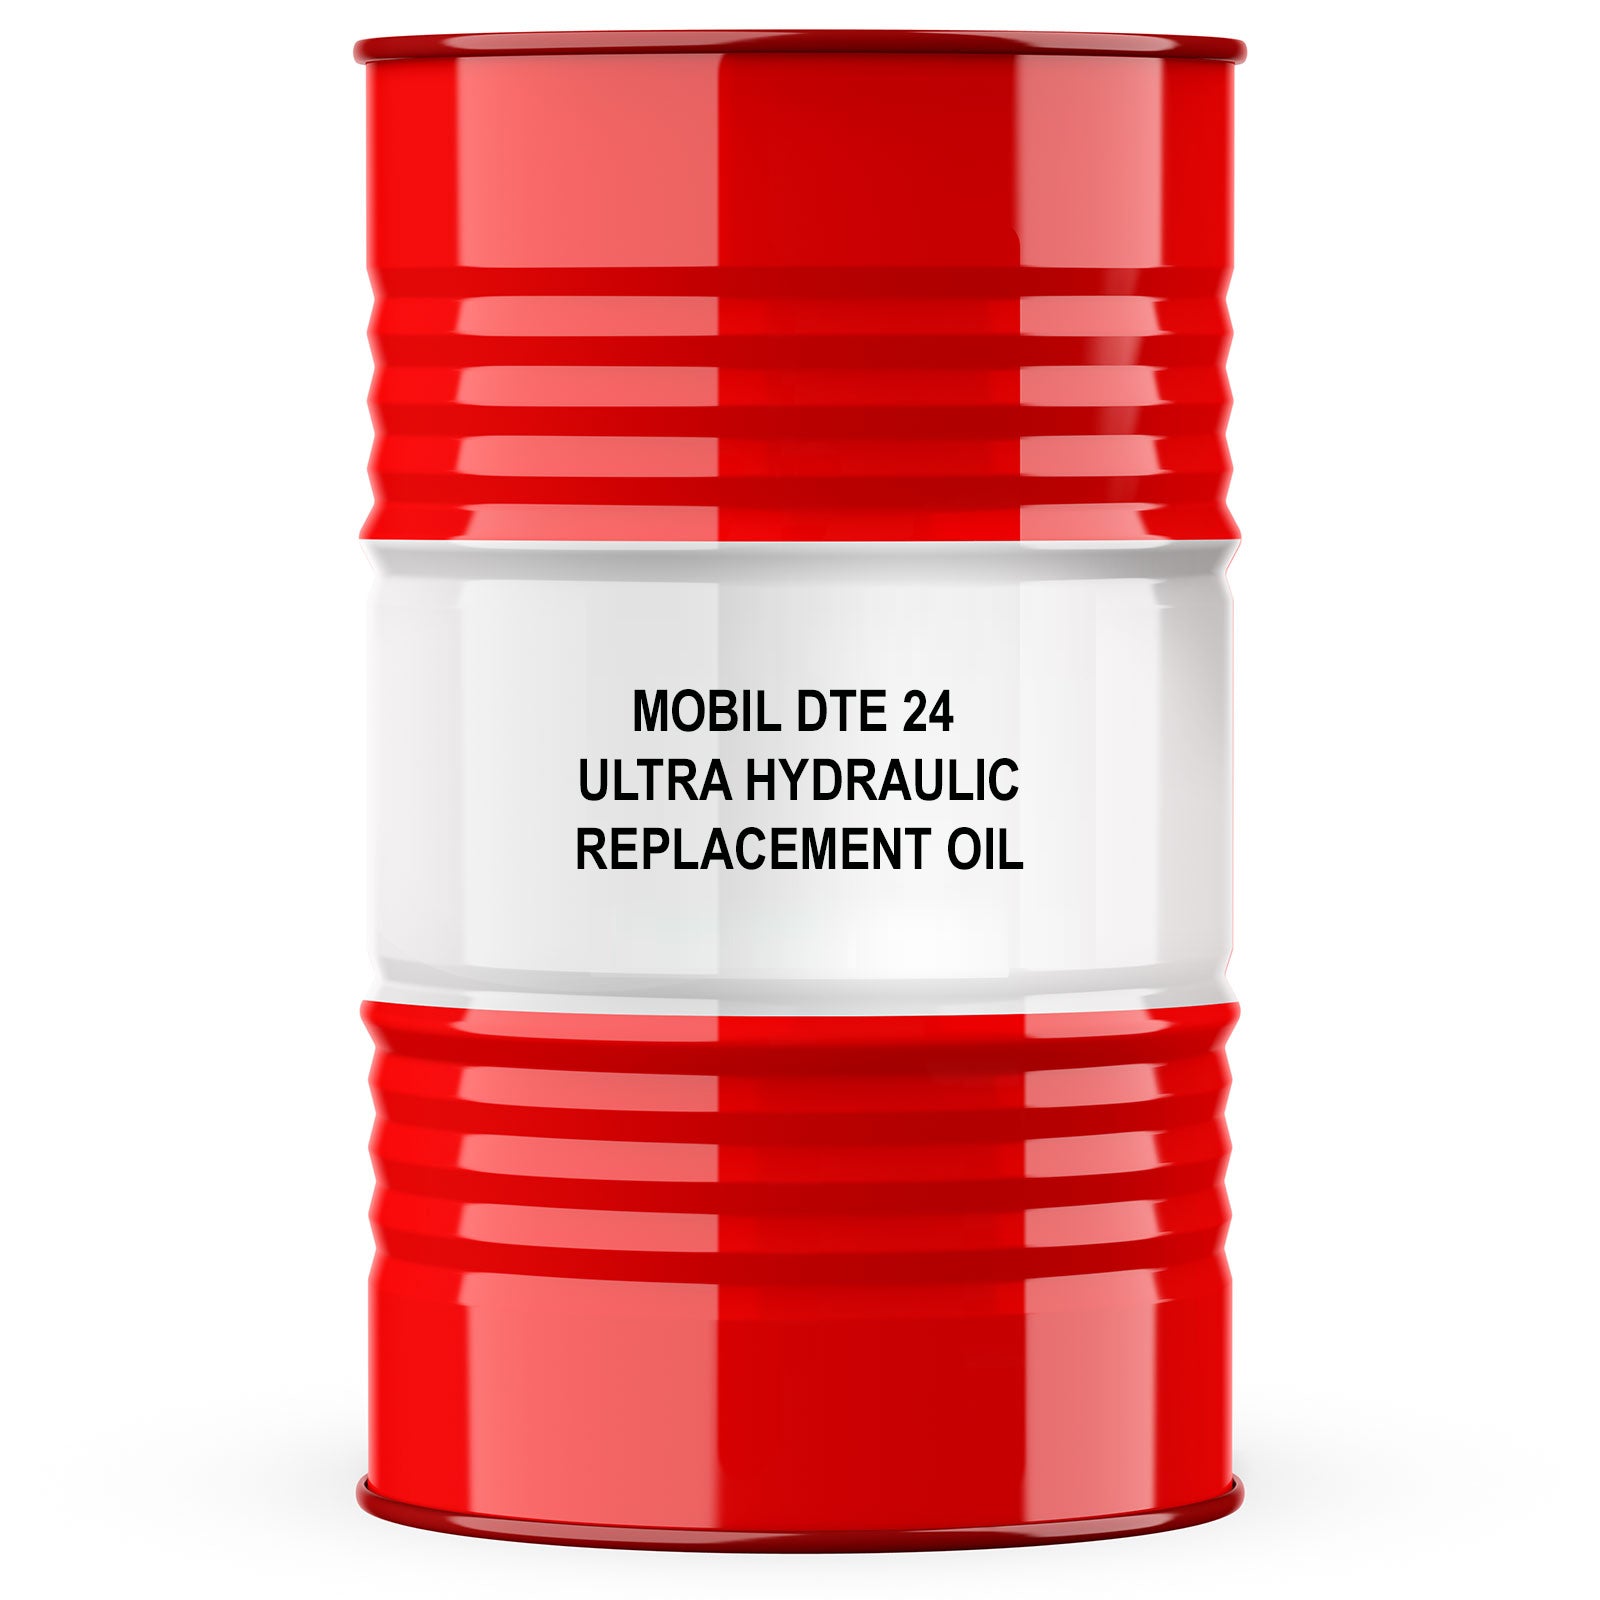 Mobil DTE 24 Ultra Hydraulic Replacement Oil by RDT - 55 Gallon Drum